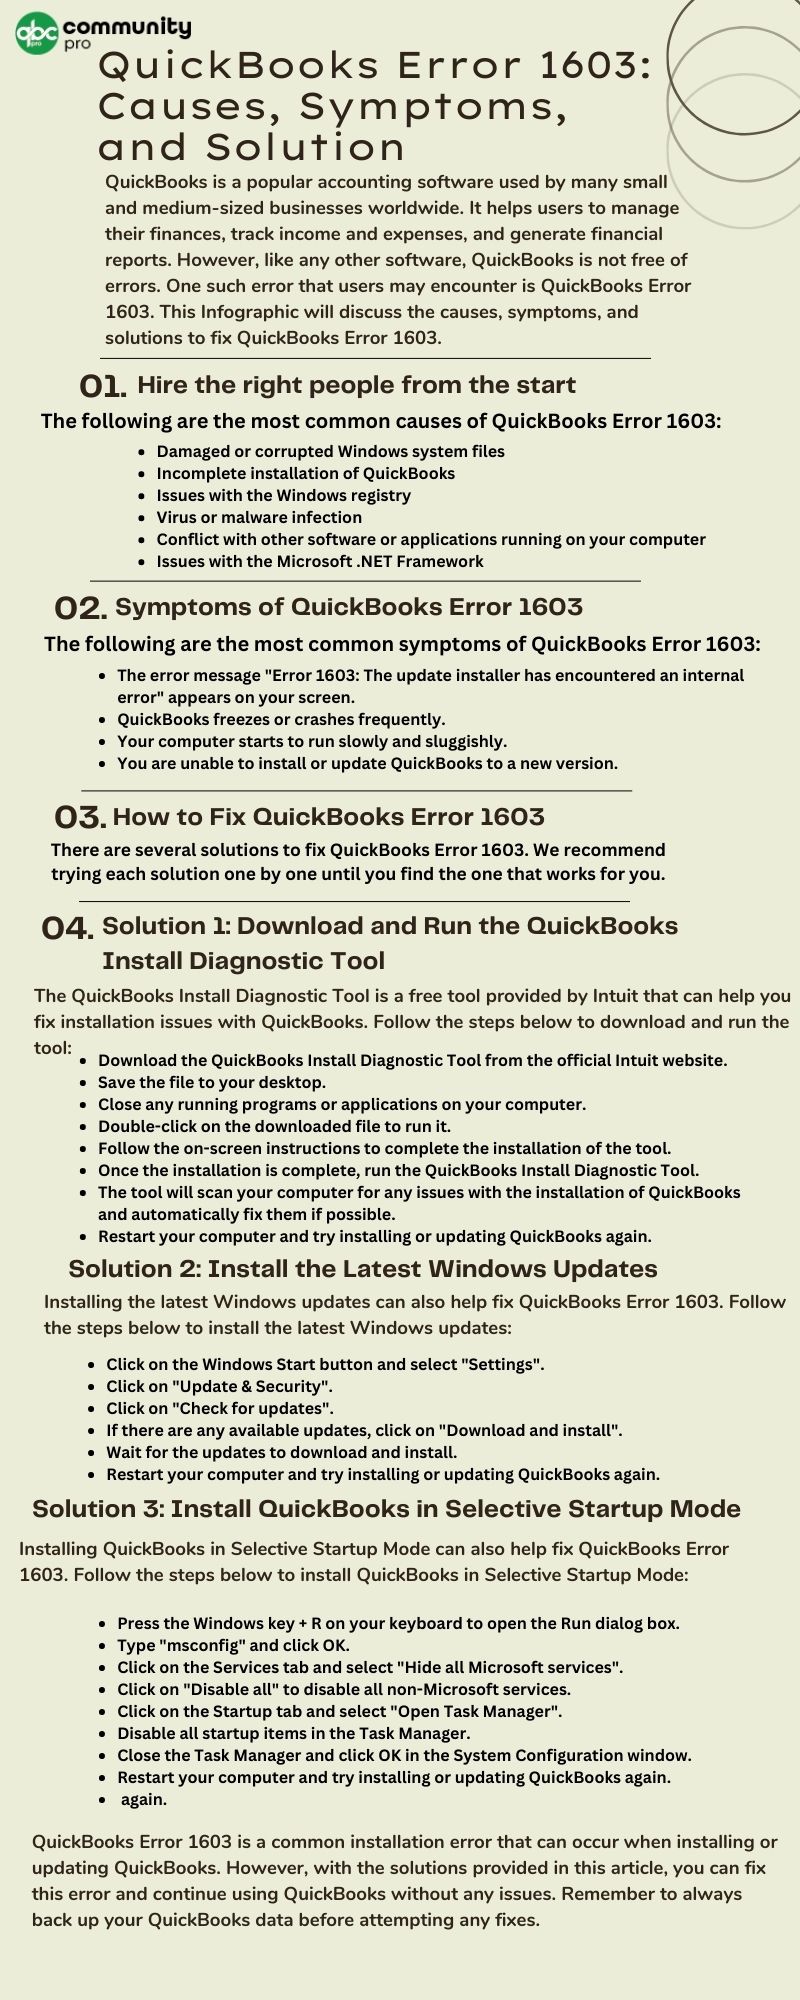 Image talking about the QuickBooks Error 1603 causes, symptoms, and solutions to fix.